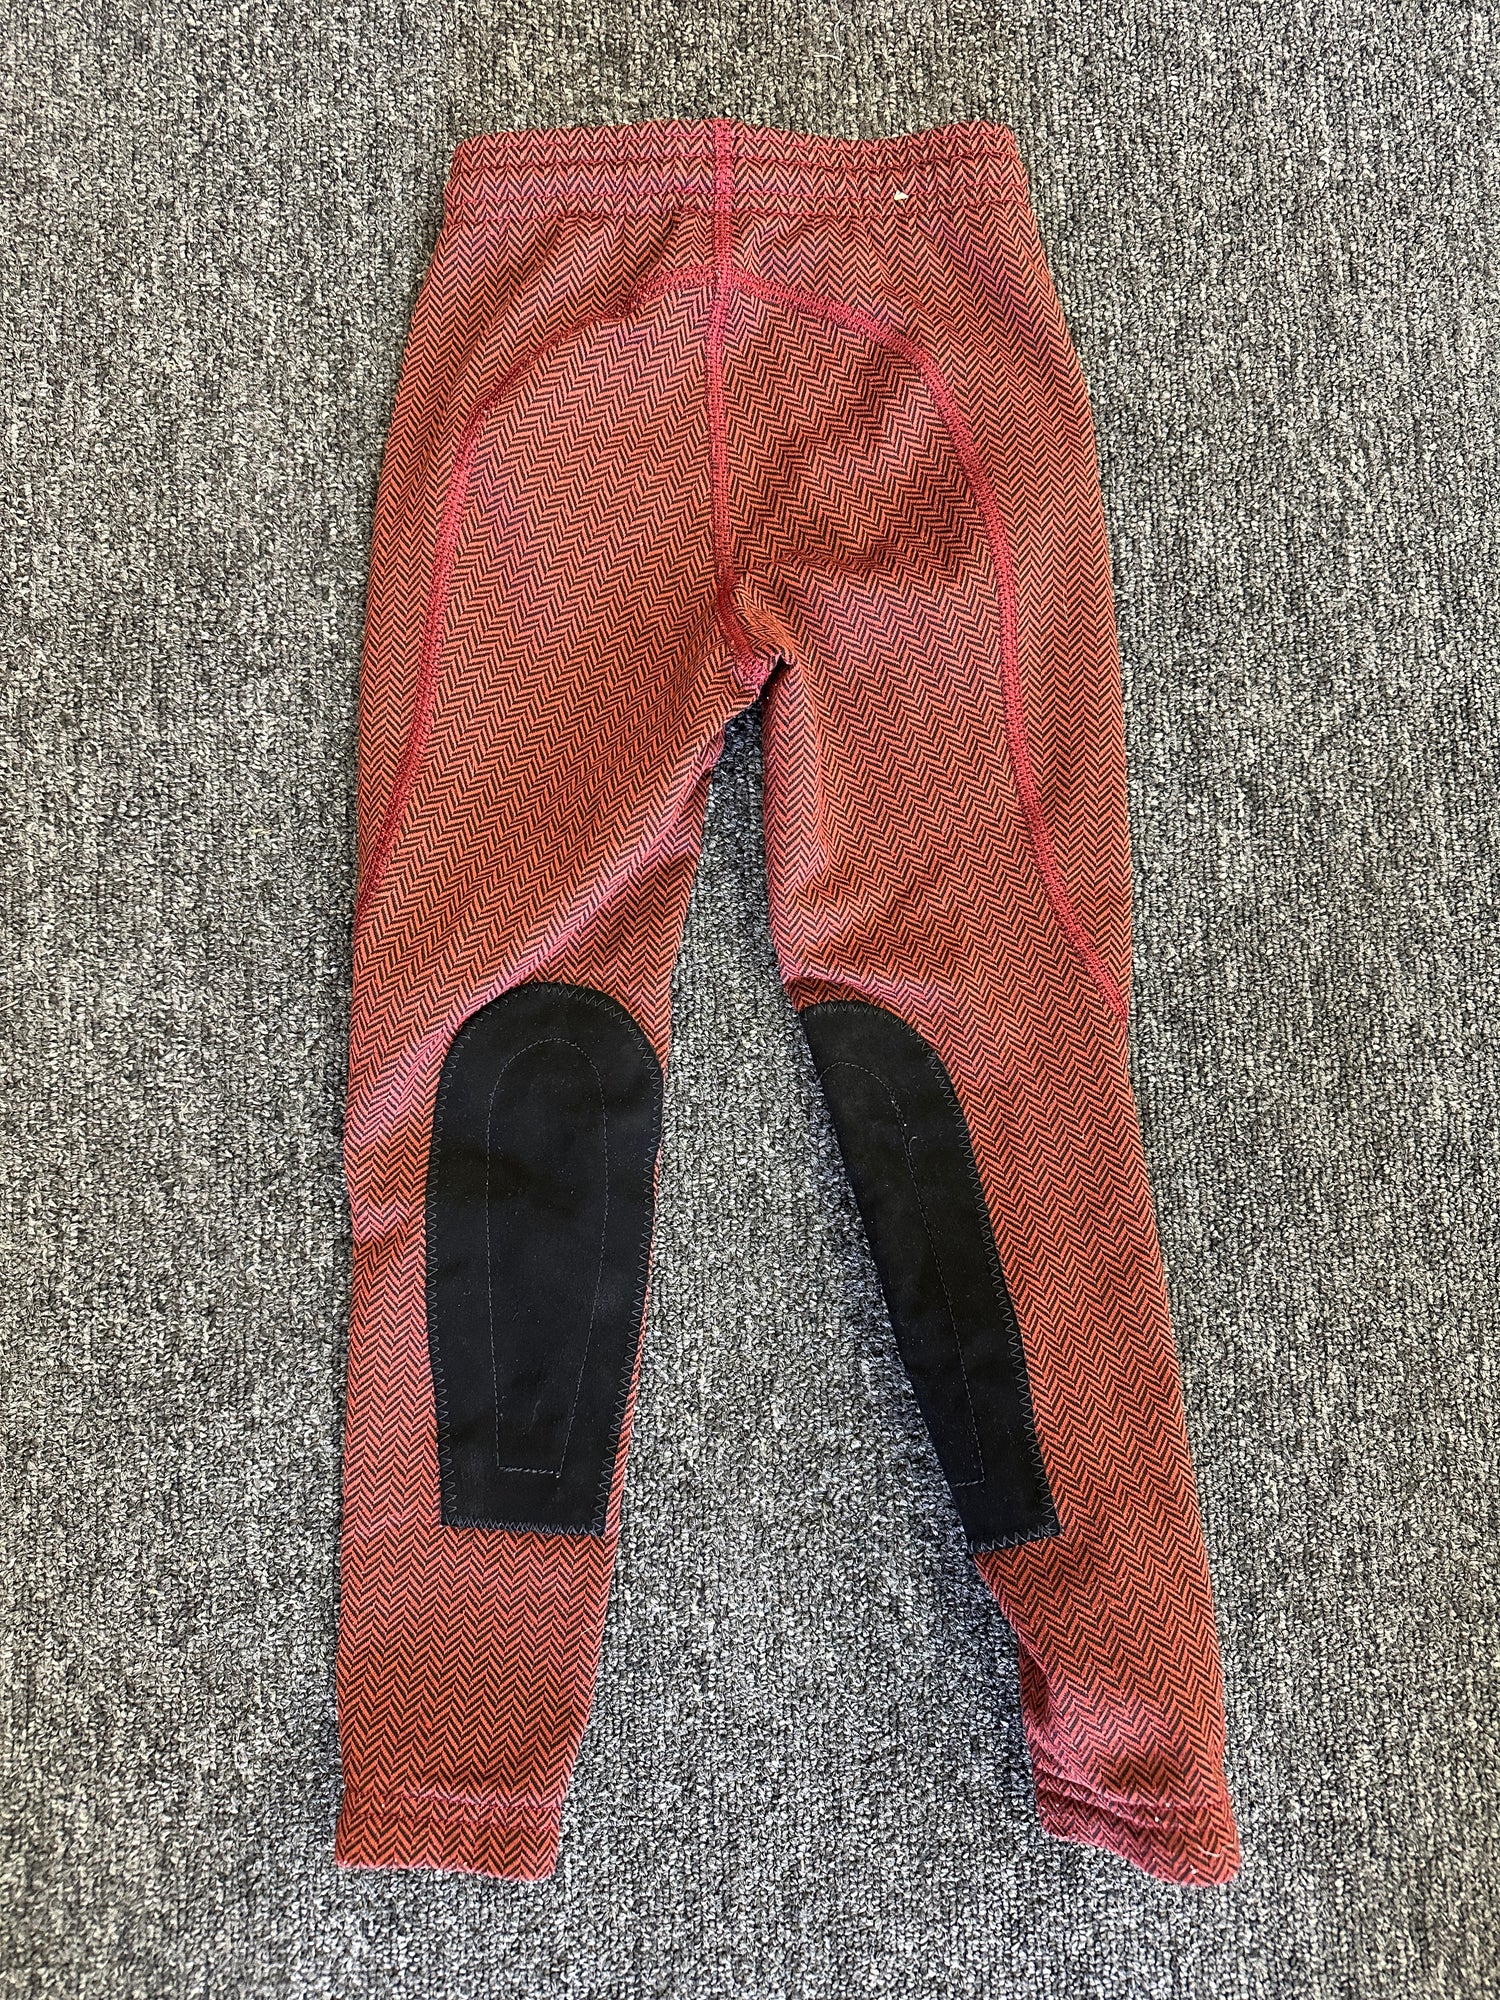 Children's Riding Breeches (Pants) Kerrit's Red and Black Size x-small